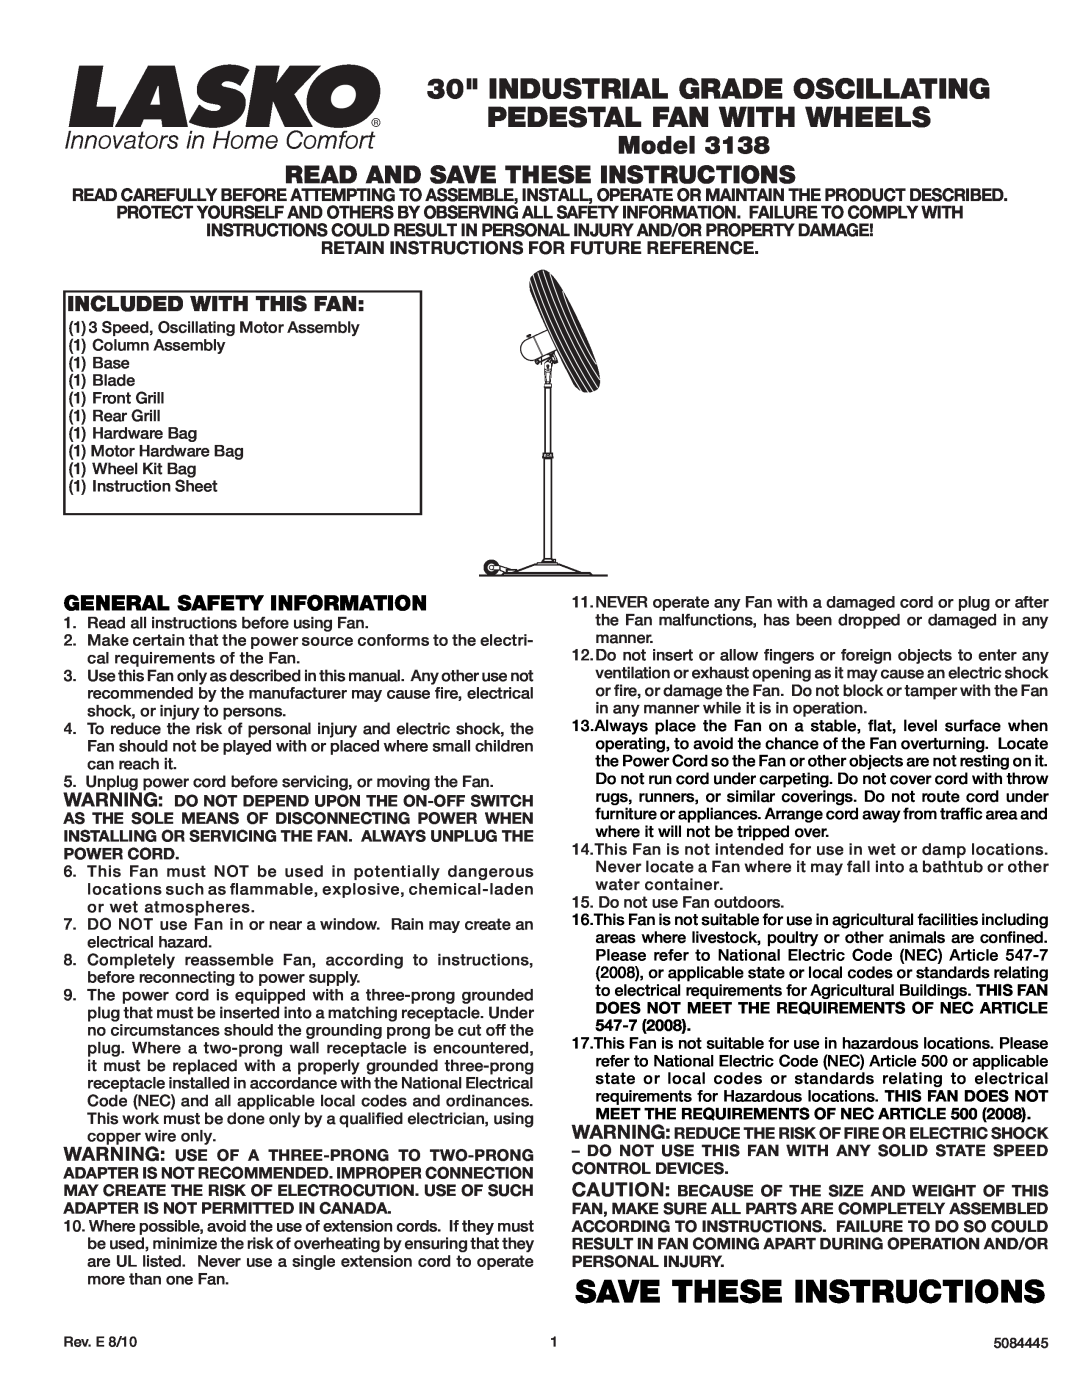 Lasko 3138 instruction sheet Save These Instructions, Industrial Grade Oscillating Pedestal Fan With Wheels 